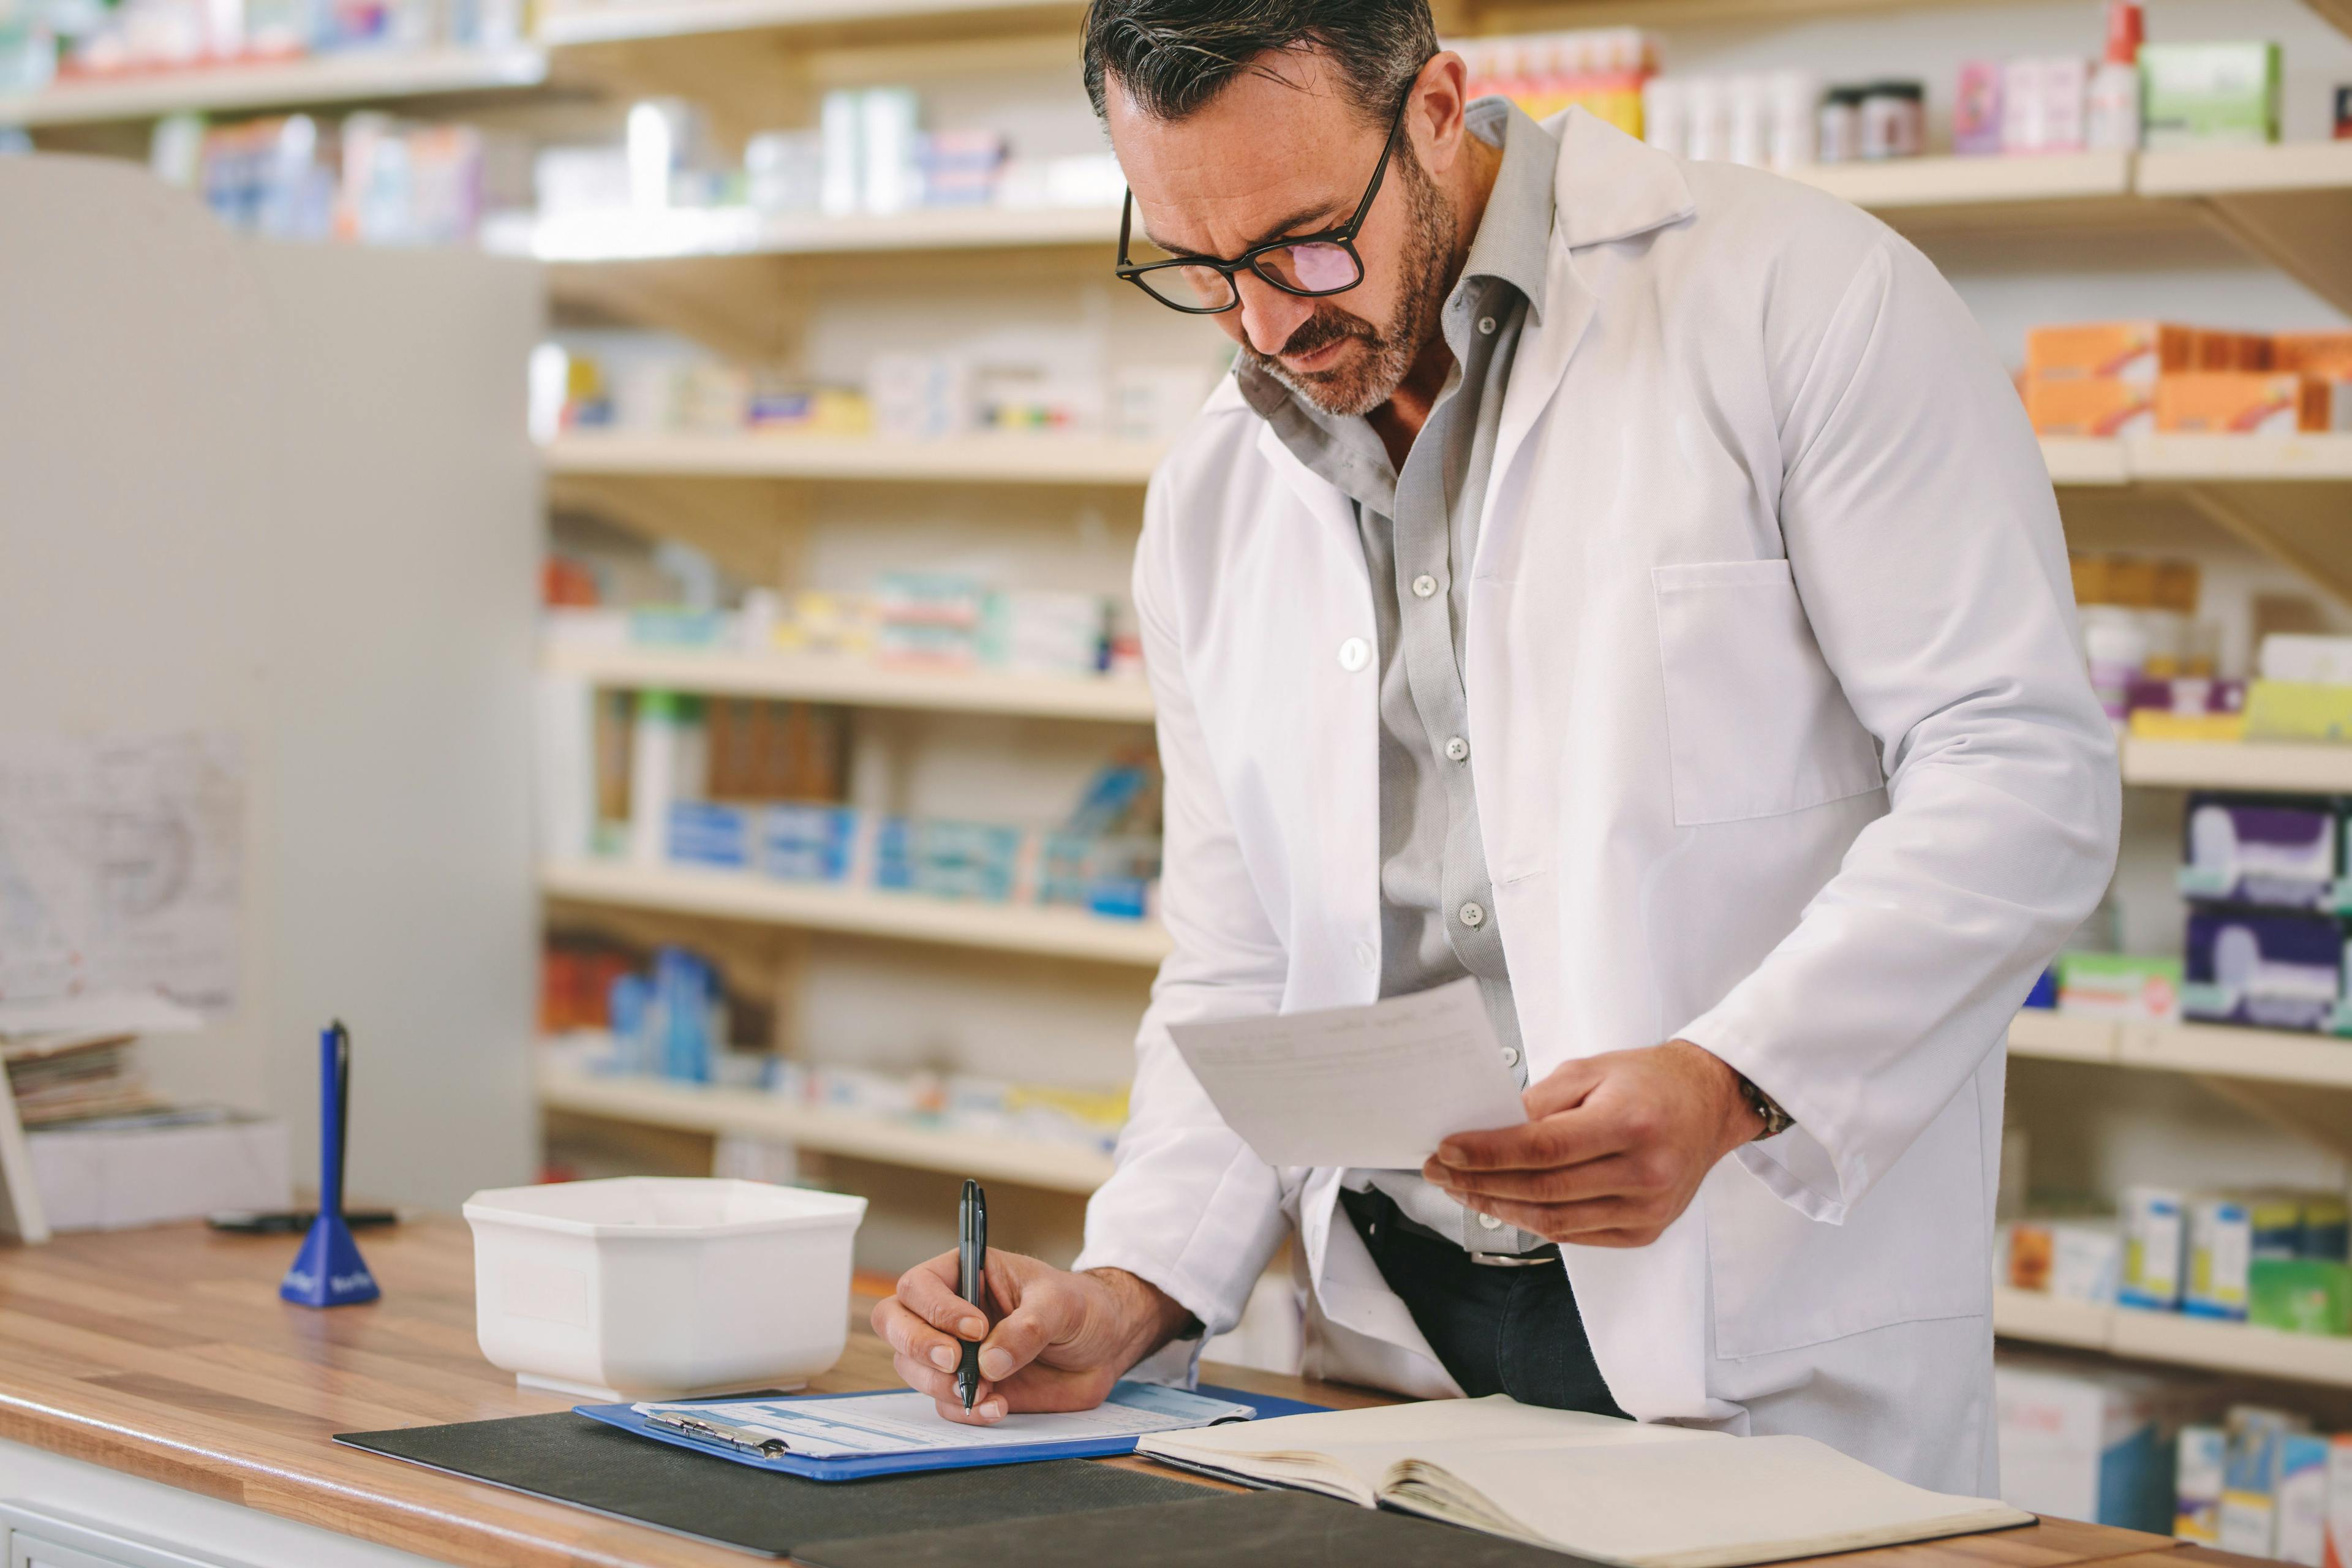 Medicare-Focused Insurance Agency Could Benefit Independent Pharmacies / Jacob Lund - stock.adobe.com